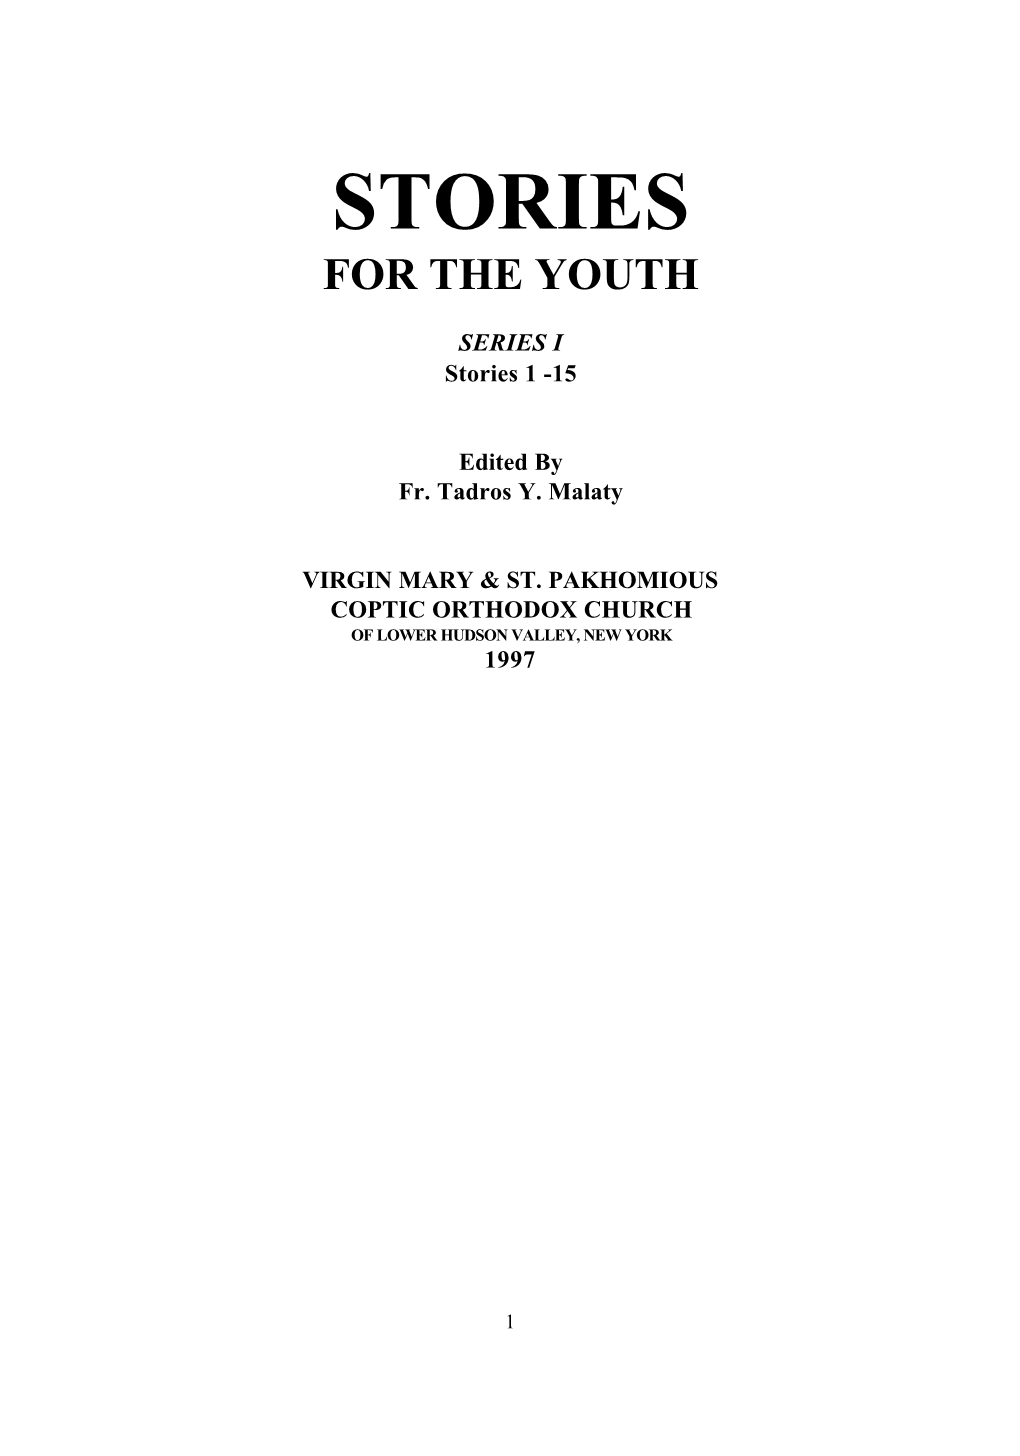 Stories for the Youth